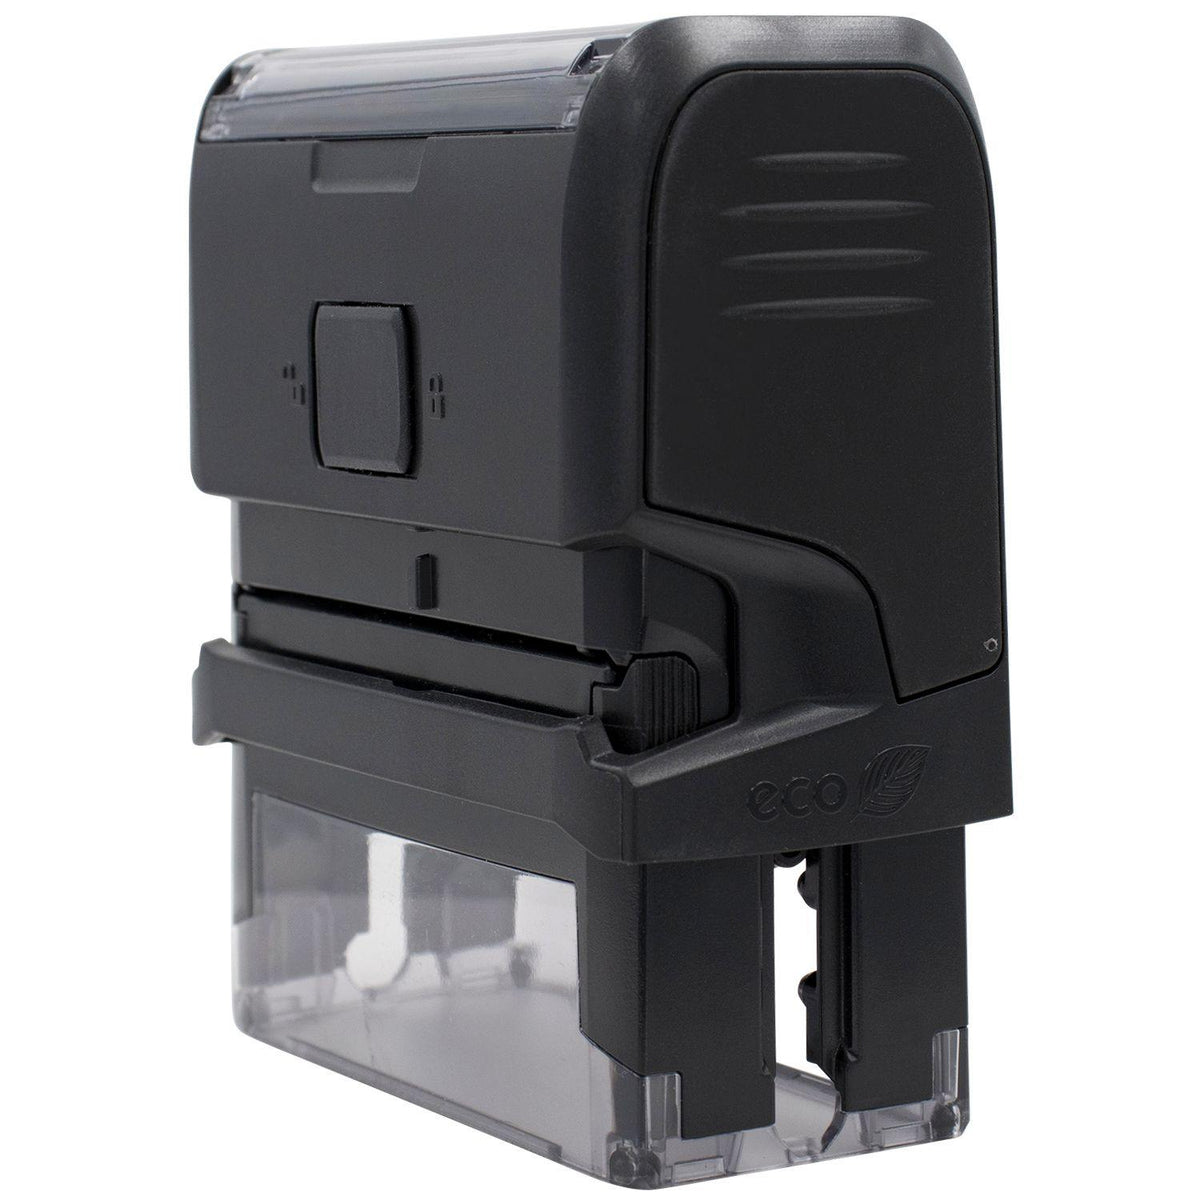 Side View of Large Self-Inking Bright Idea Stamp at an Angle